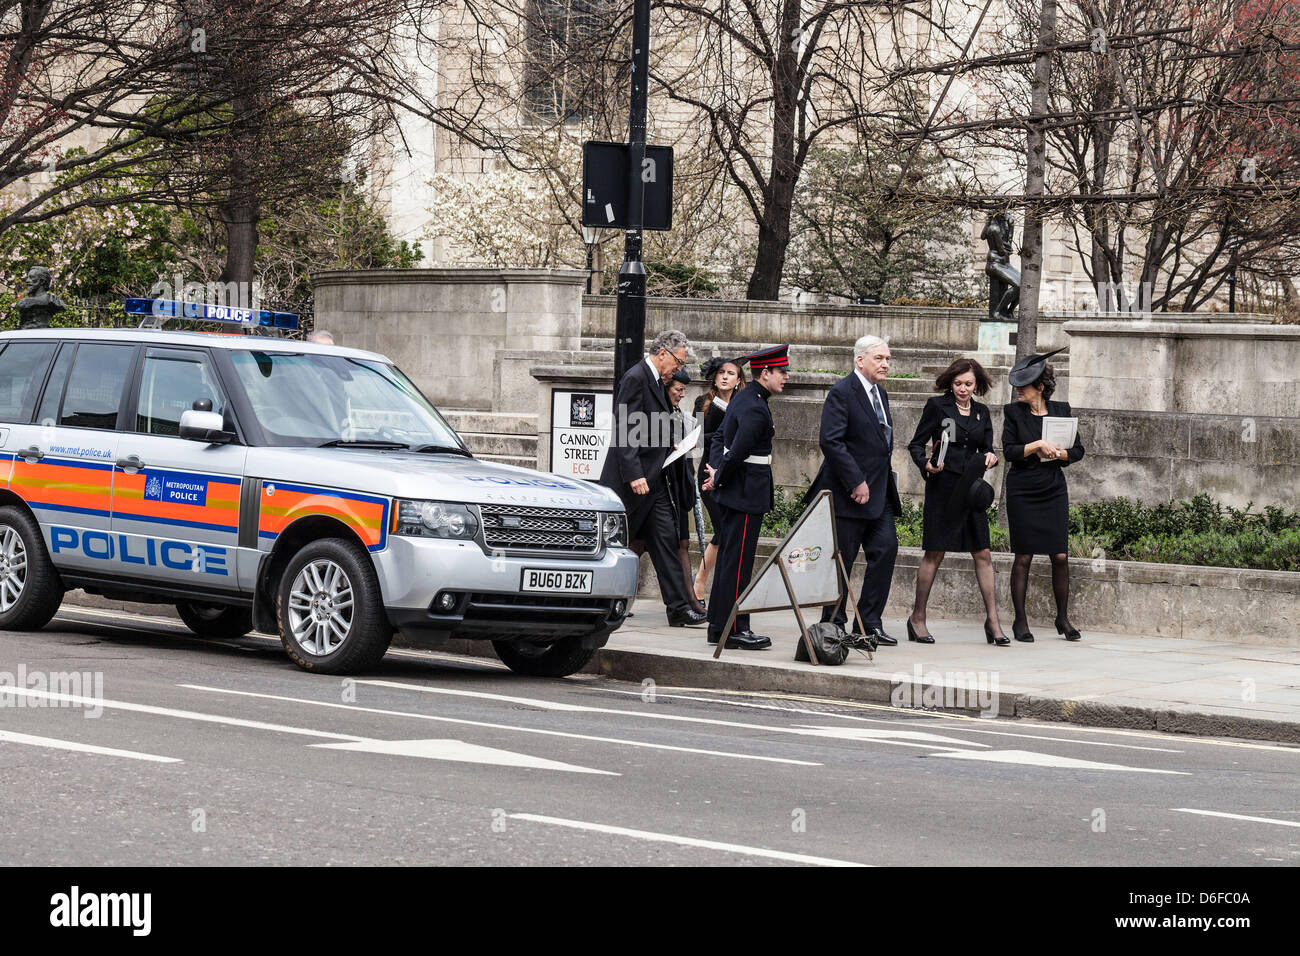 Police presence at the Funeral of Baroness Thatcher, London. Stock Photo